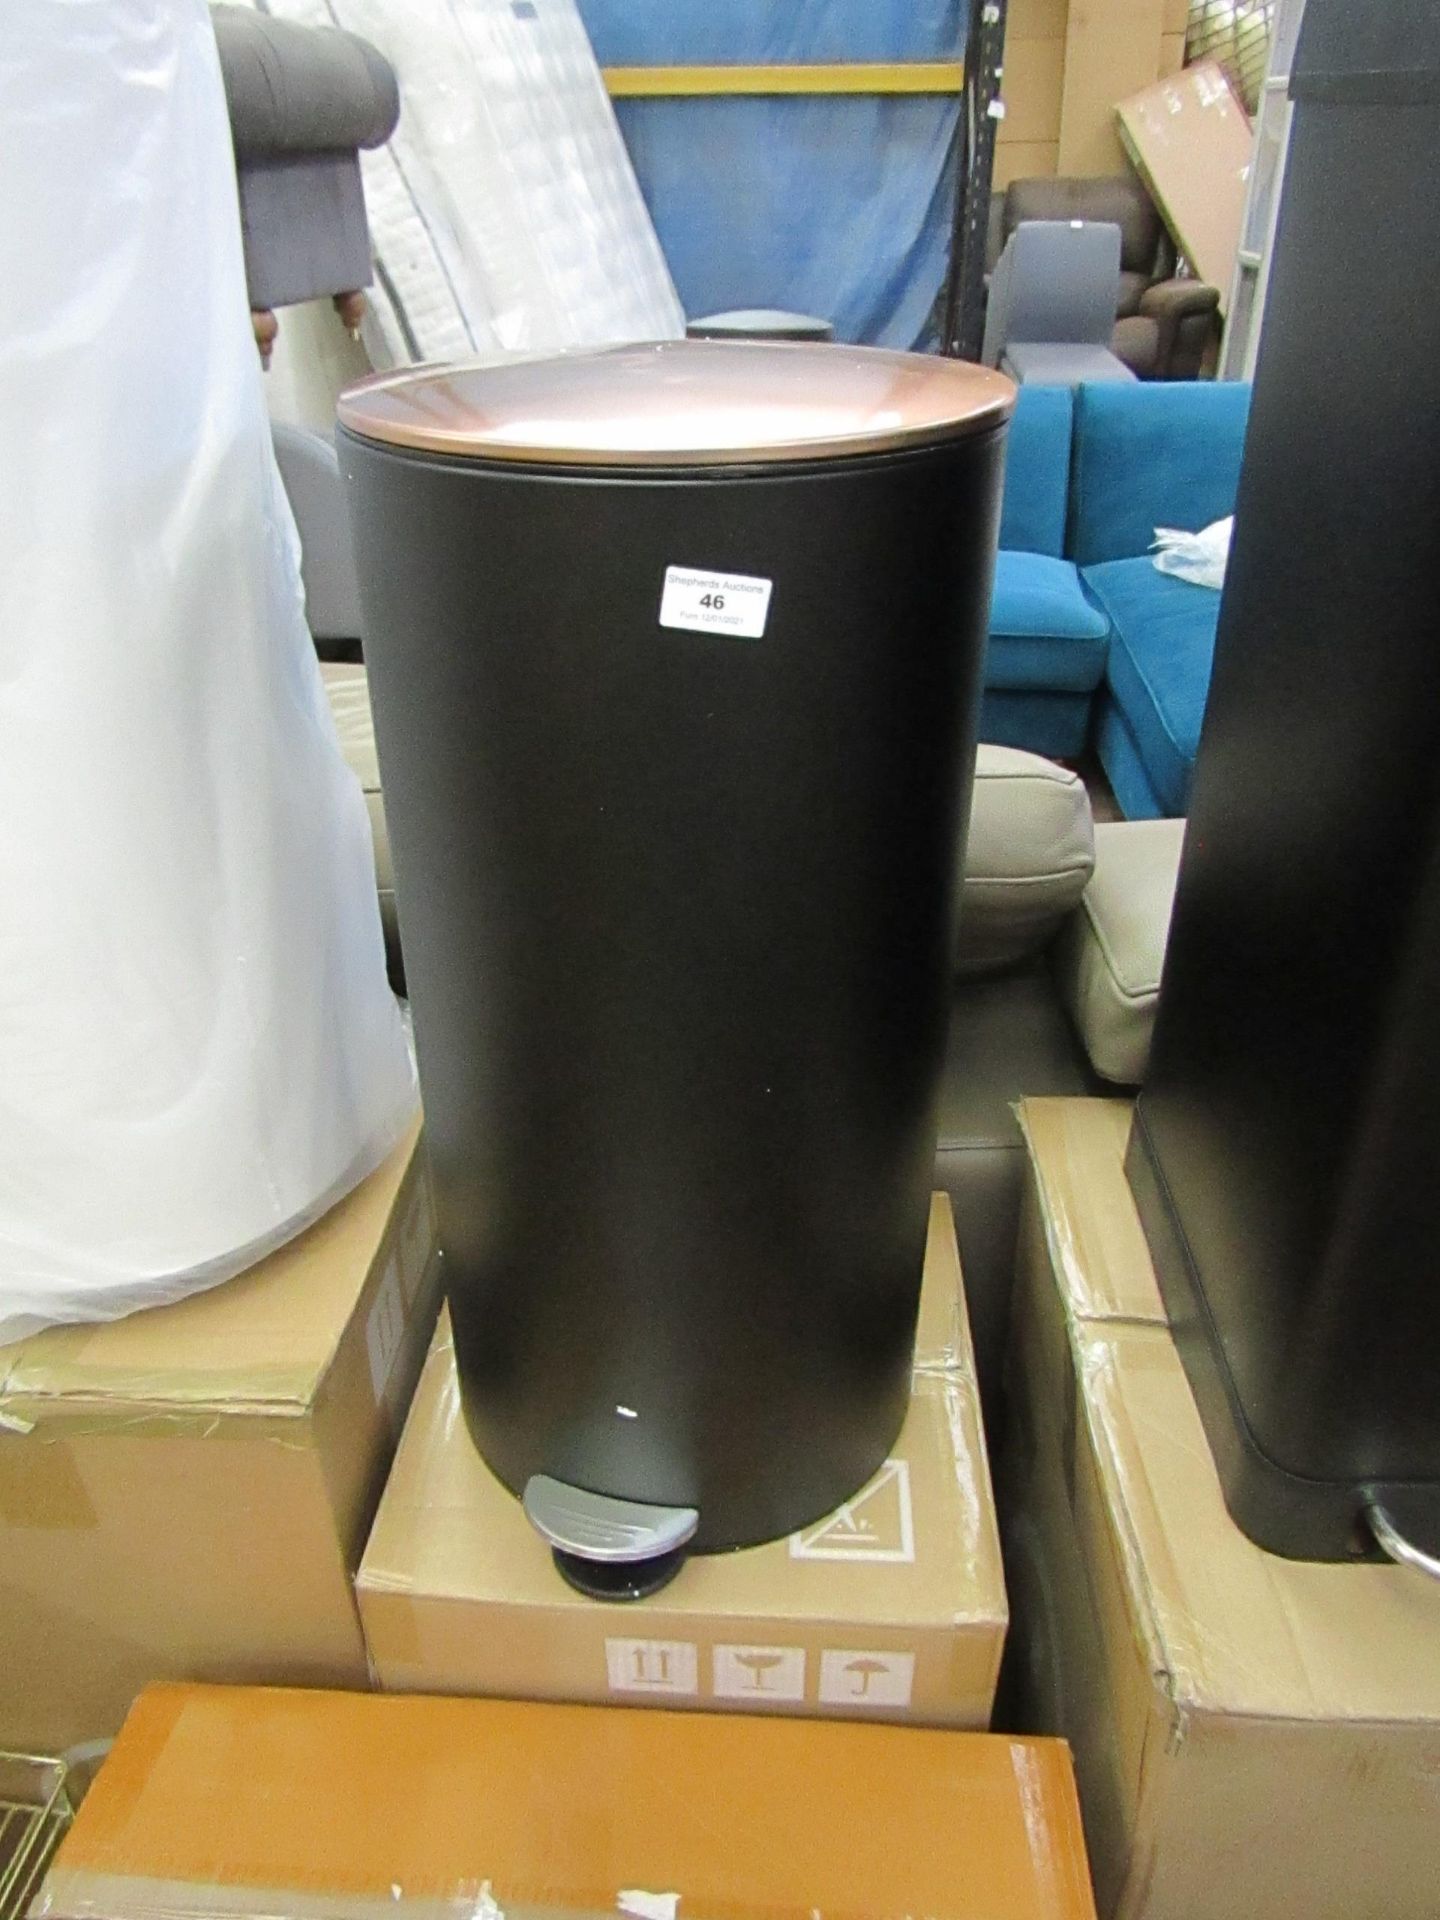 | 1x | MADE.COM CROSS FLAT TOP 27L BIN WITH MATCHING 3L PEDAL BIN | SMALL DENT ON THE BACK WITH